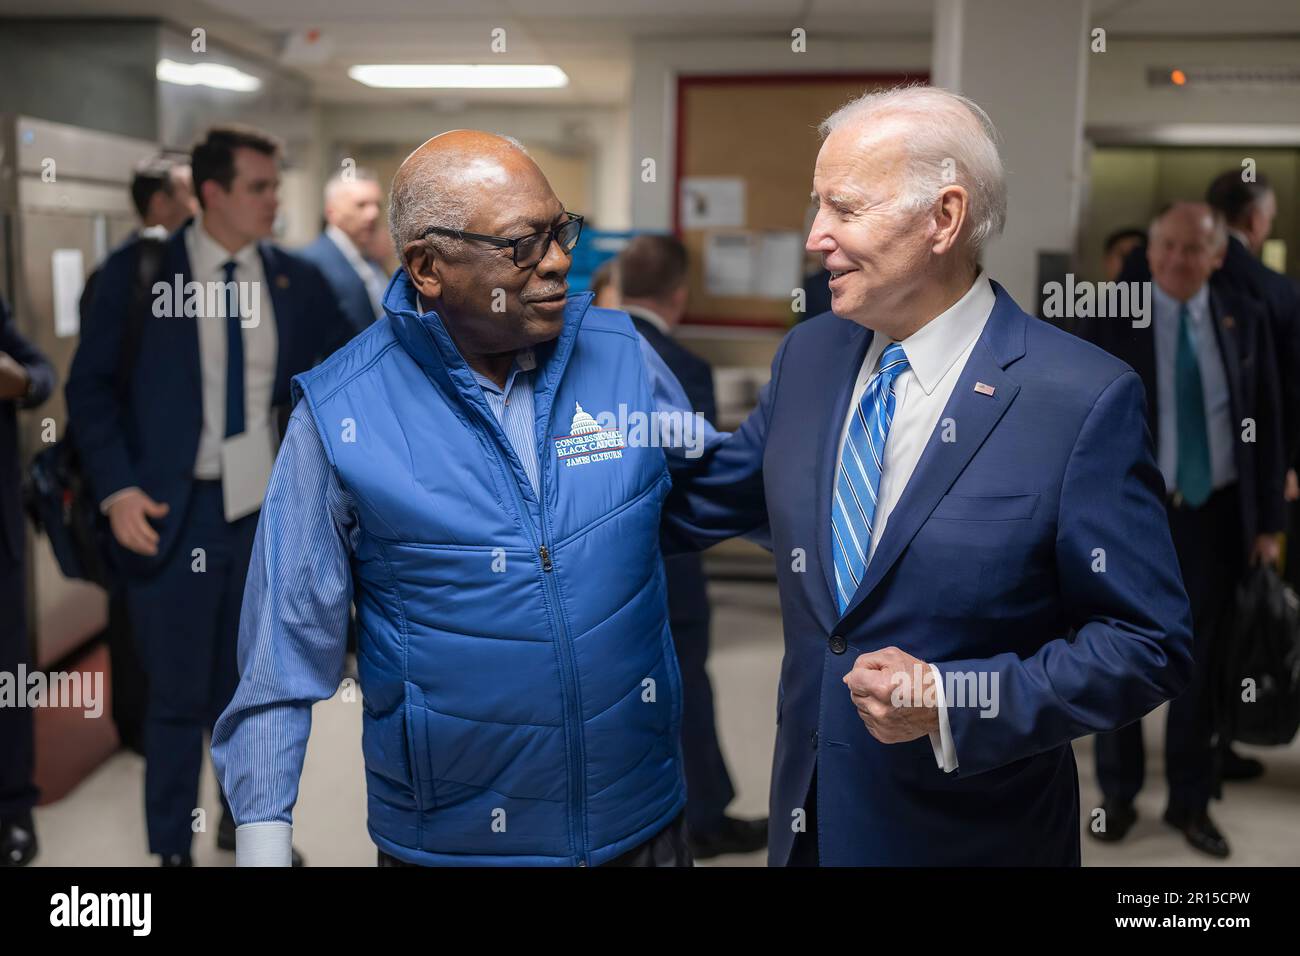 President Joe Biden greets Rep. Jim Clyburn (D-SC) at the Democratic House Caucus Retreat, Wednesday, March 1, 2023, at the Hyatt Regency Baltimore Inner Harbor in Baltimore. (Official White House Photo by Adam Schultz) Stock Photo